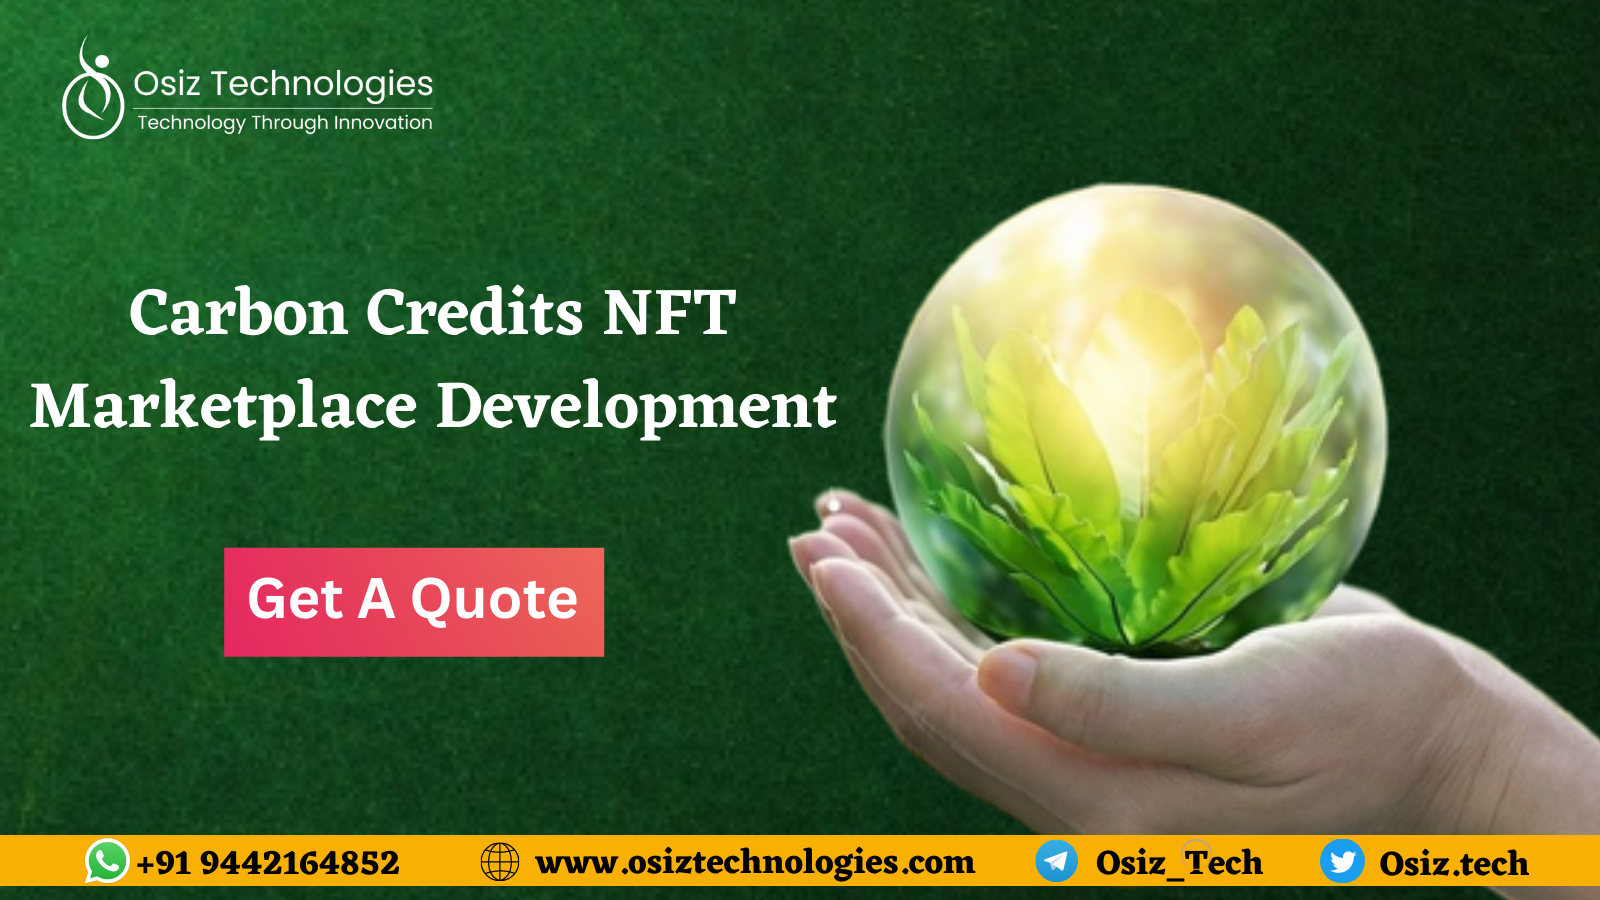 Materialize your dream of building a full-featured Carbon credits NFT Marketplace with a reliable Carbon credits NFT Marketplace Development Service 